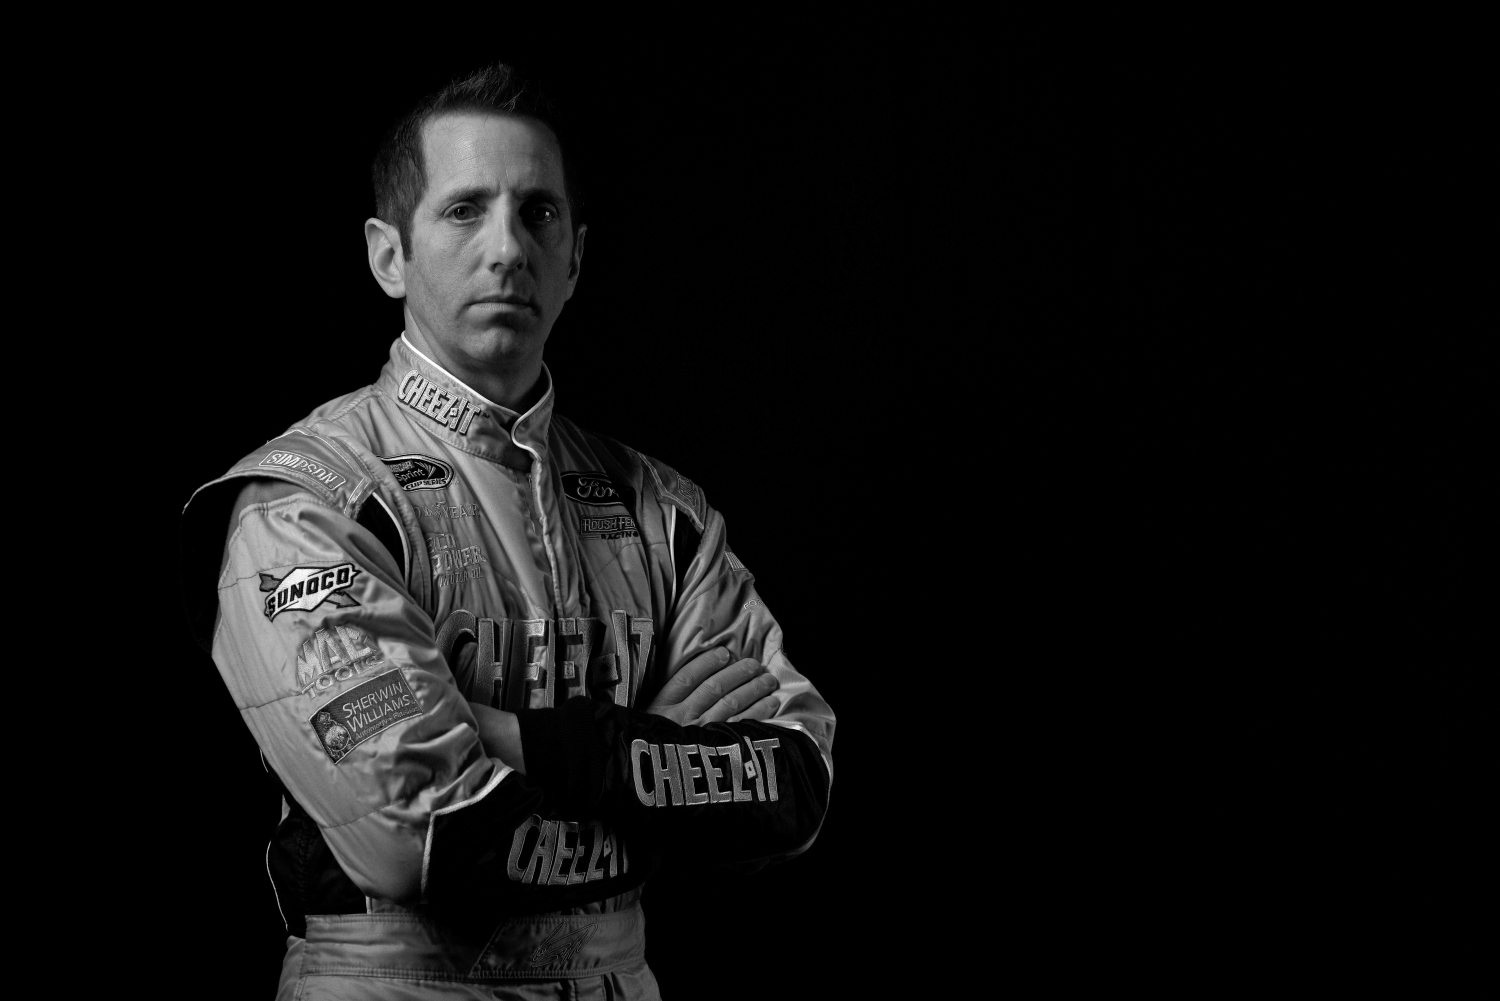 NASCAR Driver Greg Biffle Paid a Hefty $250,001 Price For Secretly Violating His Ex-Wife’s Privacy